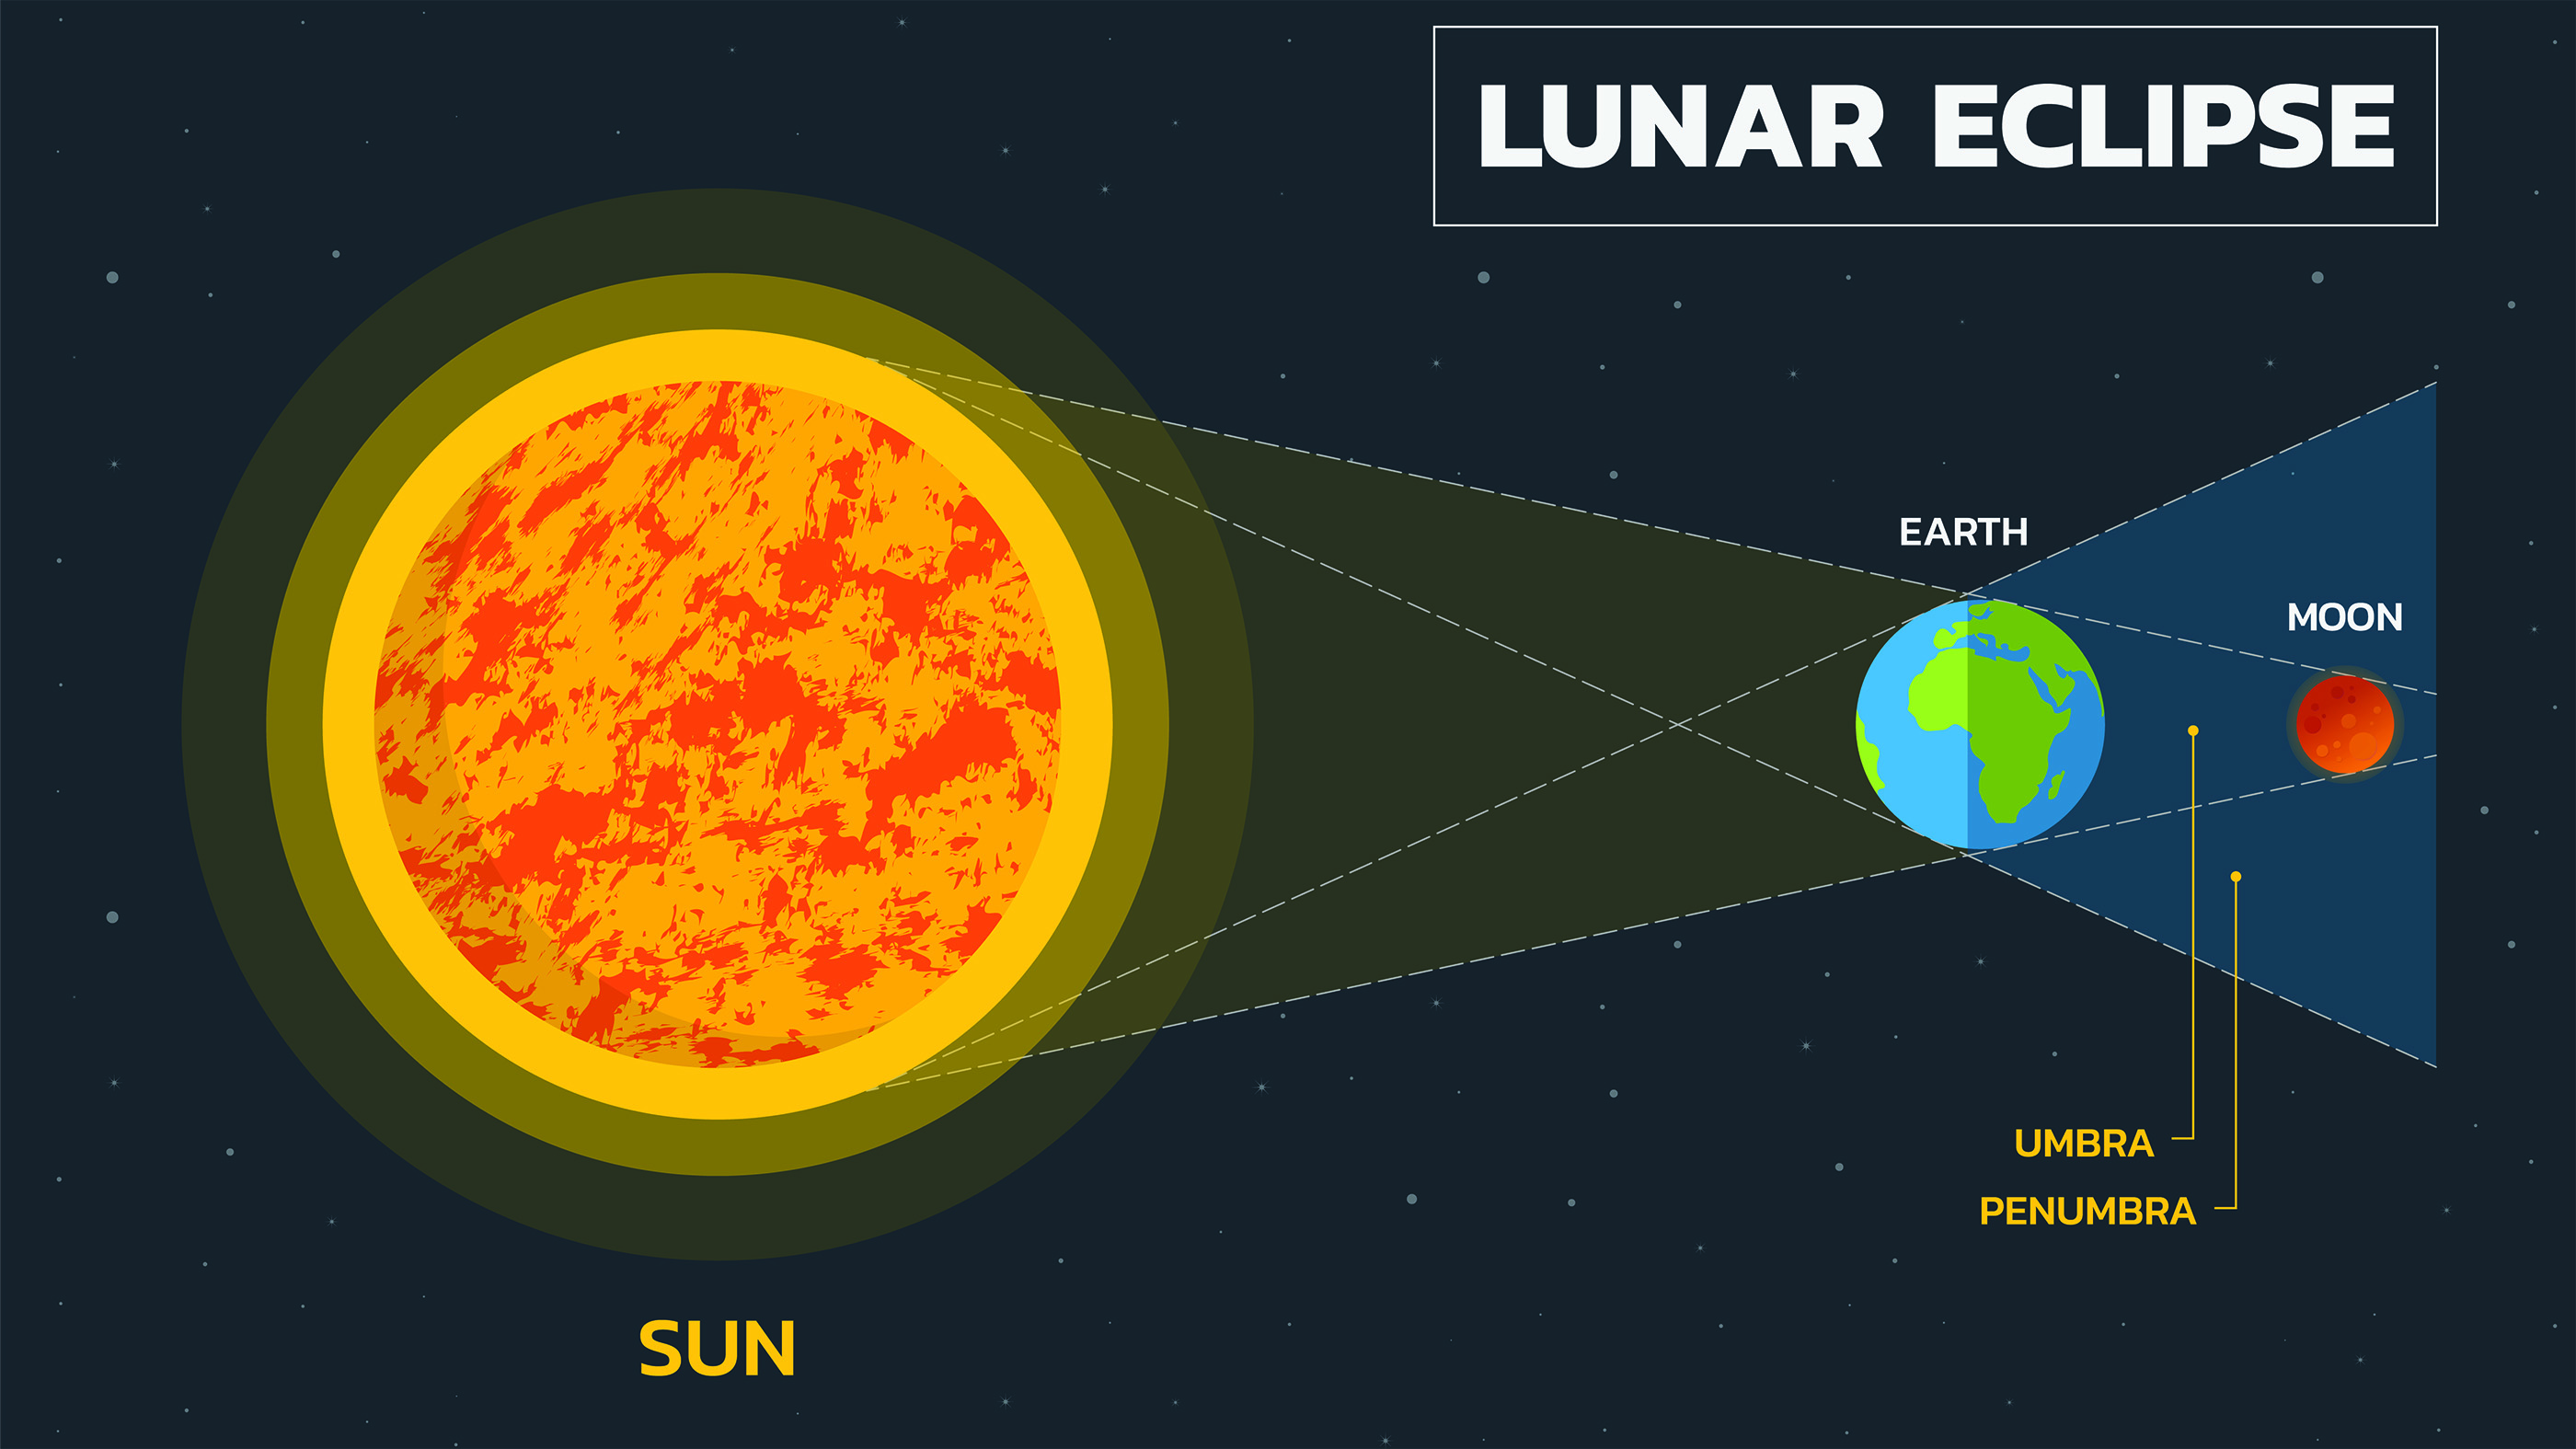 A lunar eclipse occurs when the sun, moon, and Earth are aligned in that exact order.